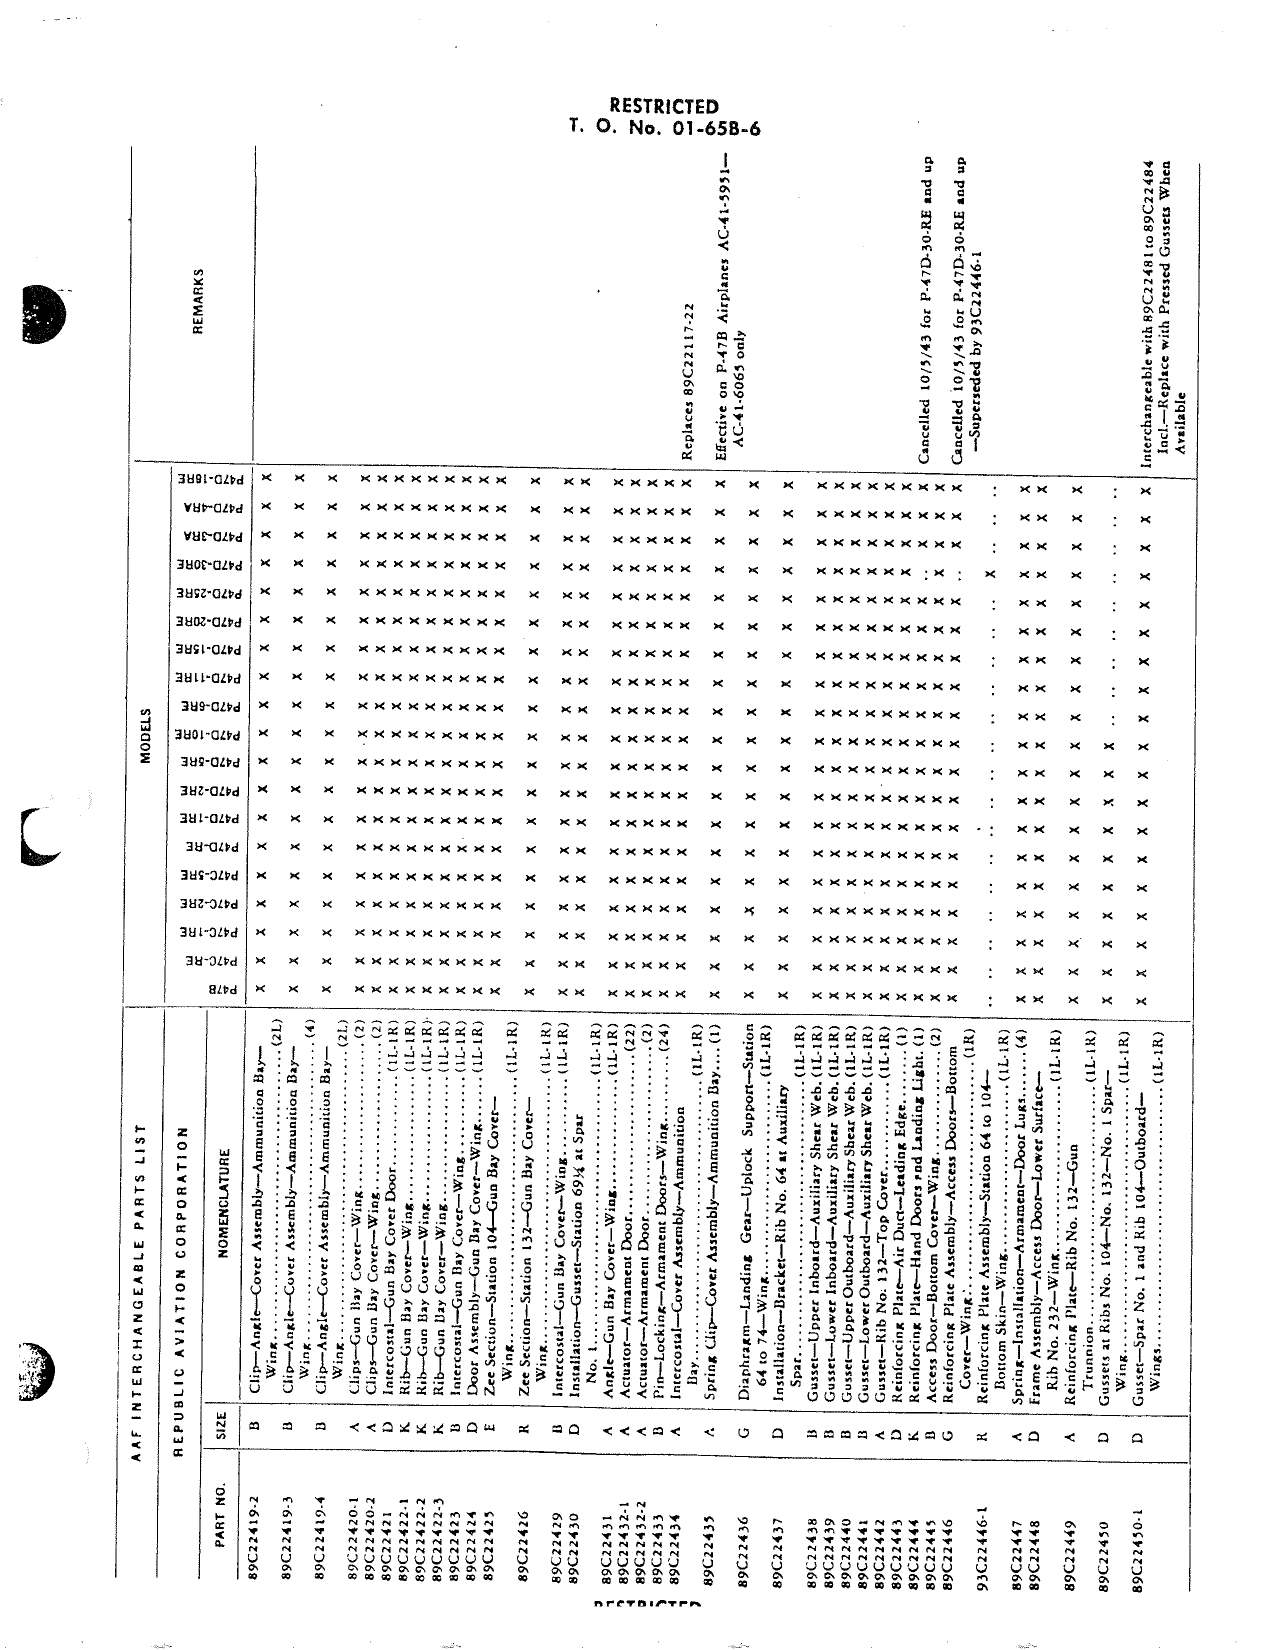 Sample page 65 from AirCorps Library document: Interchangeable Parts List - P-47